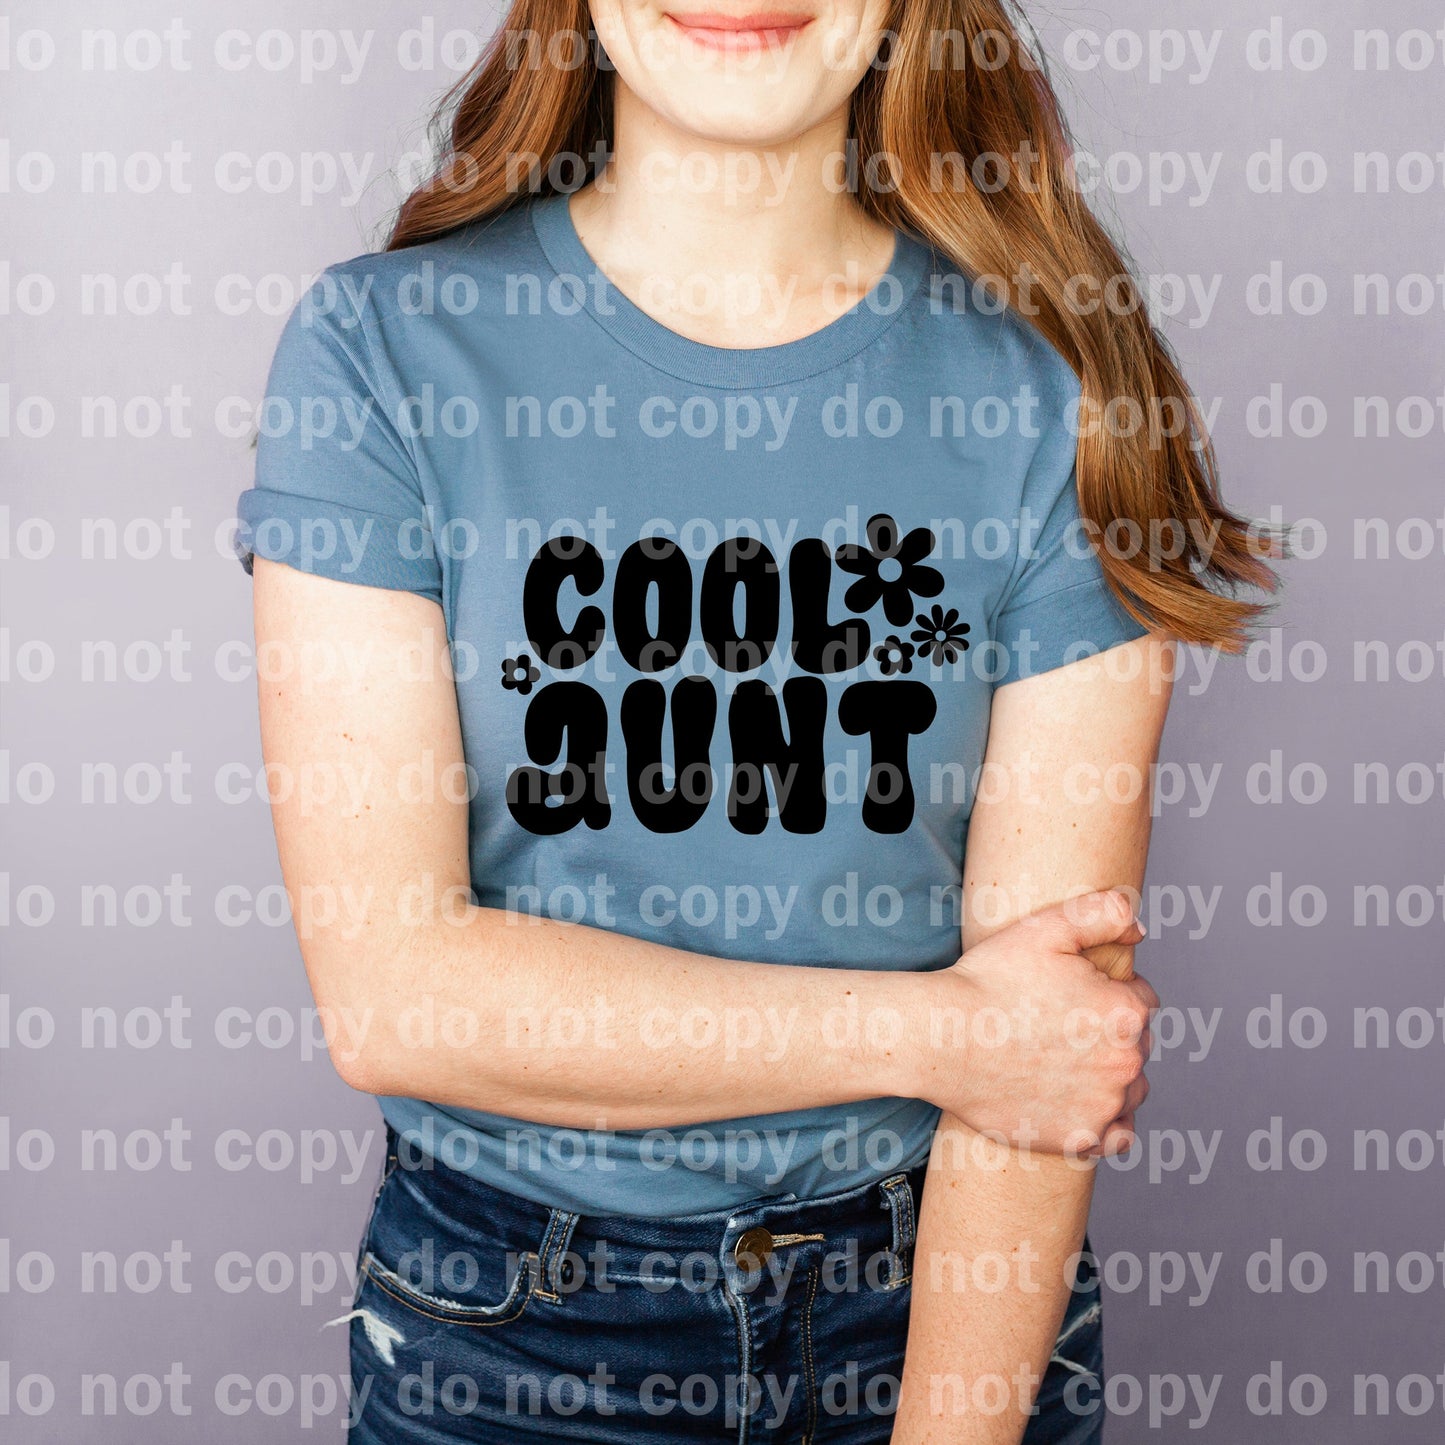 Cool Aunt Full Color/One Color Dream Print or Sublimation Print